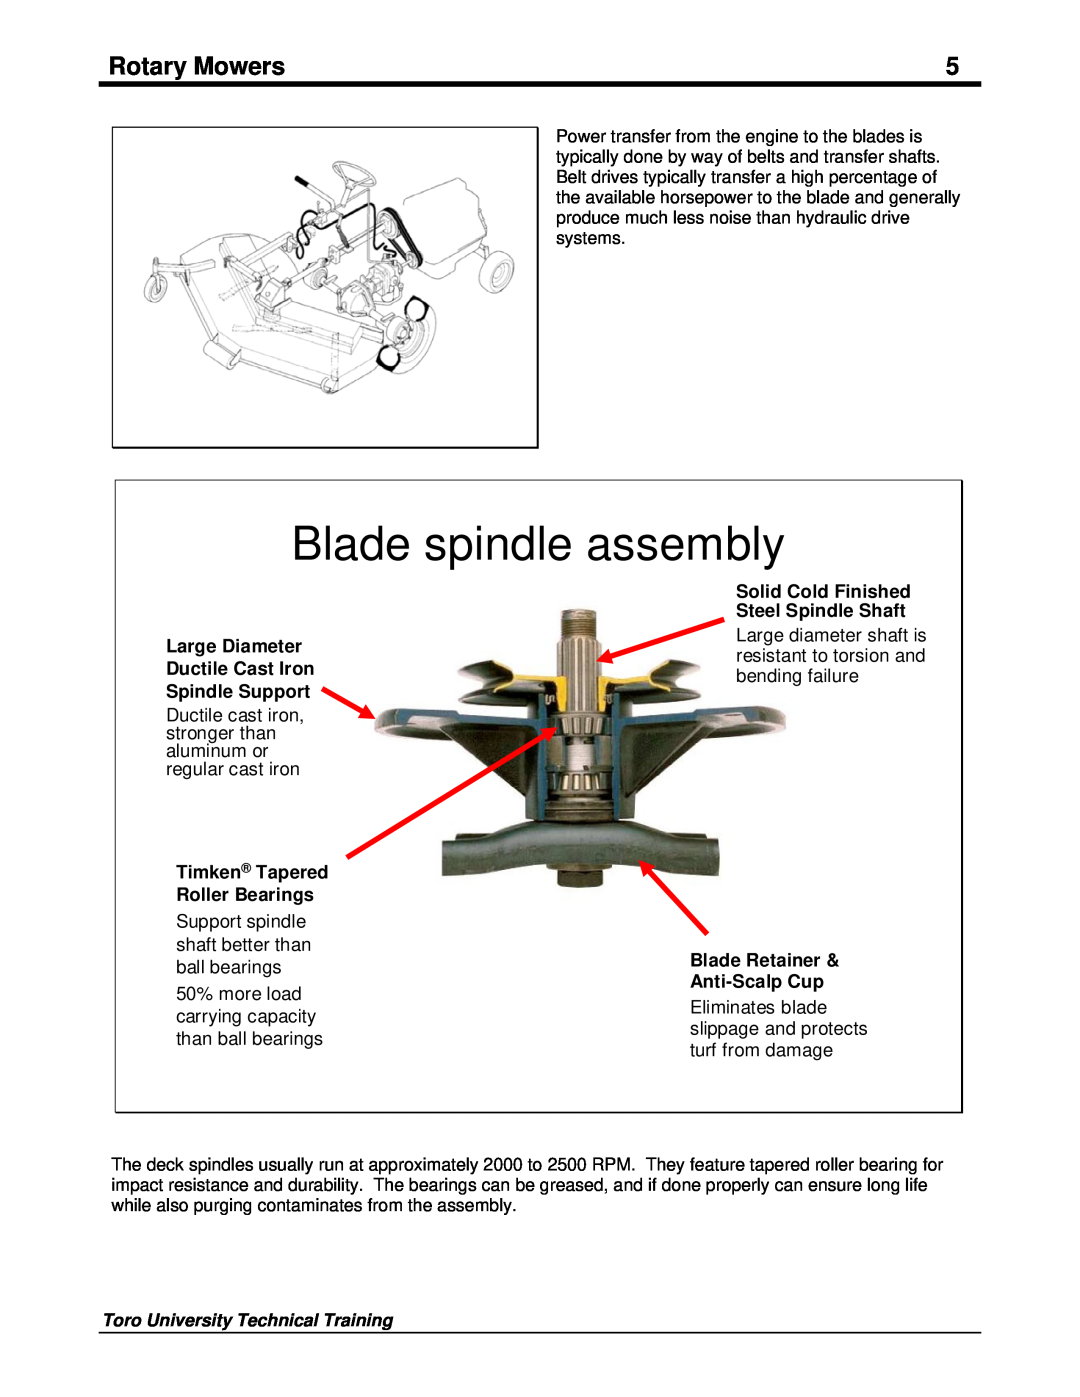 Toro 09167SL manual Blade spindle assembly, Rotary Mowers, Timken Tapered Roller Bearings, Blade Retainer & Anti-ScalpCup 